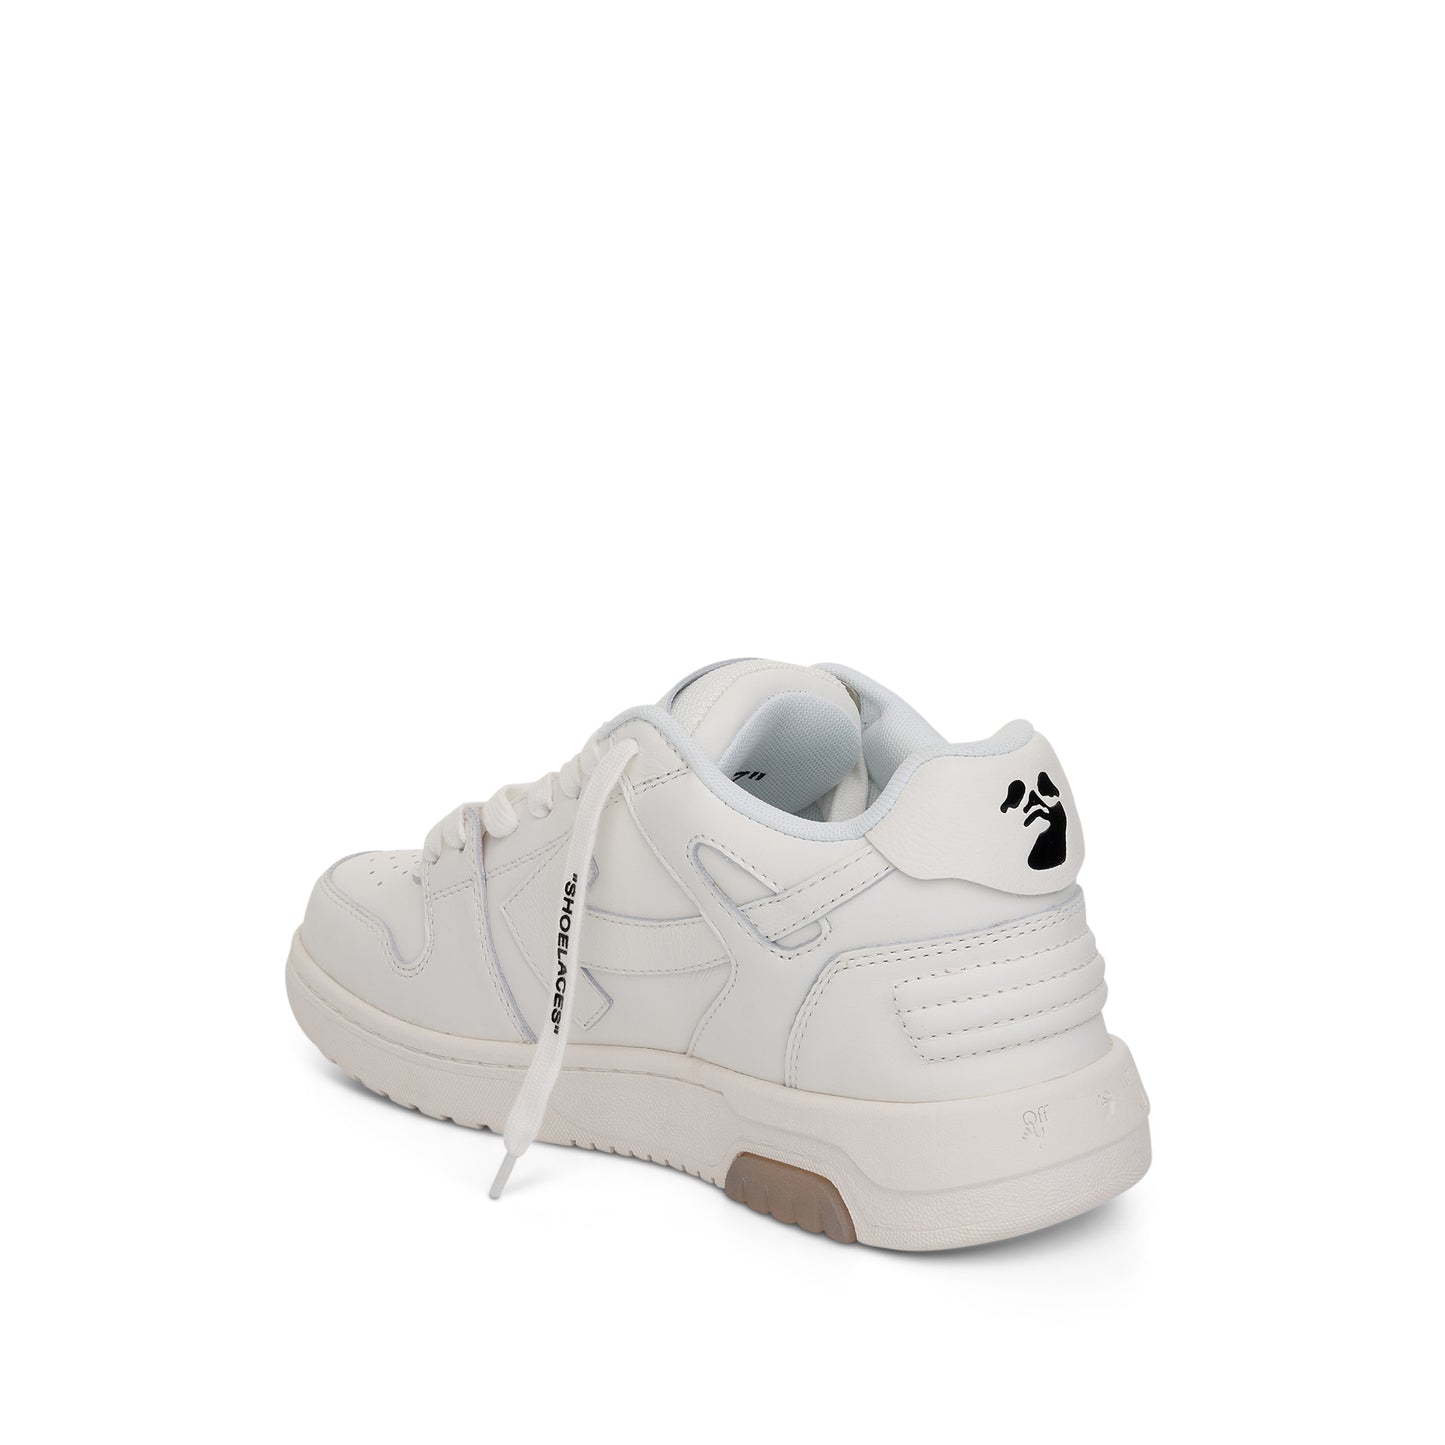 Out Of Office "For Walking" Sneakers in White/Silver